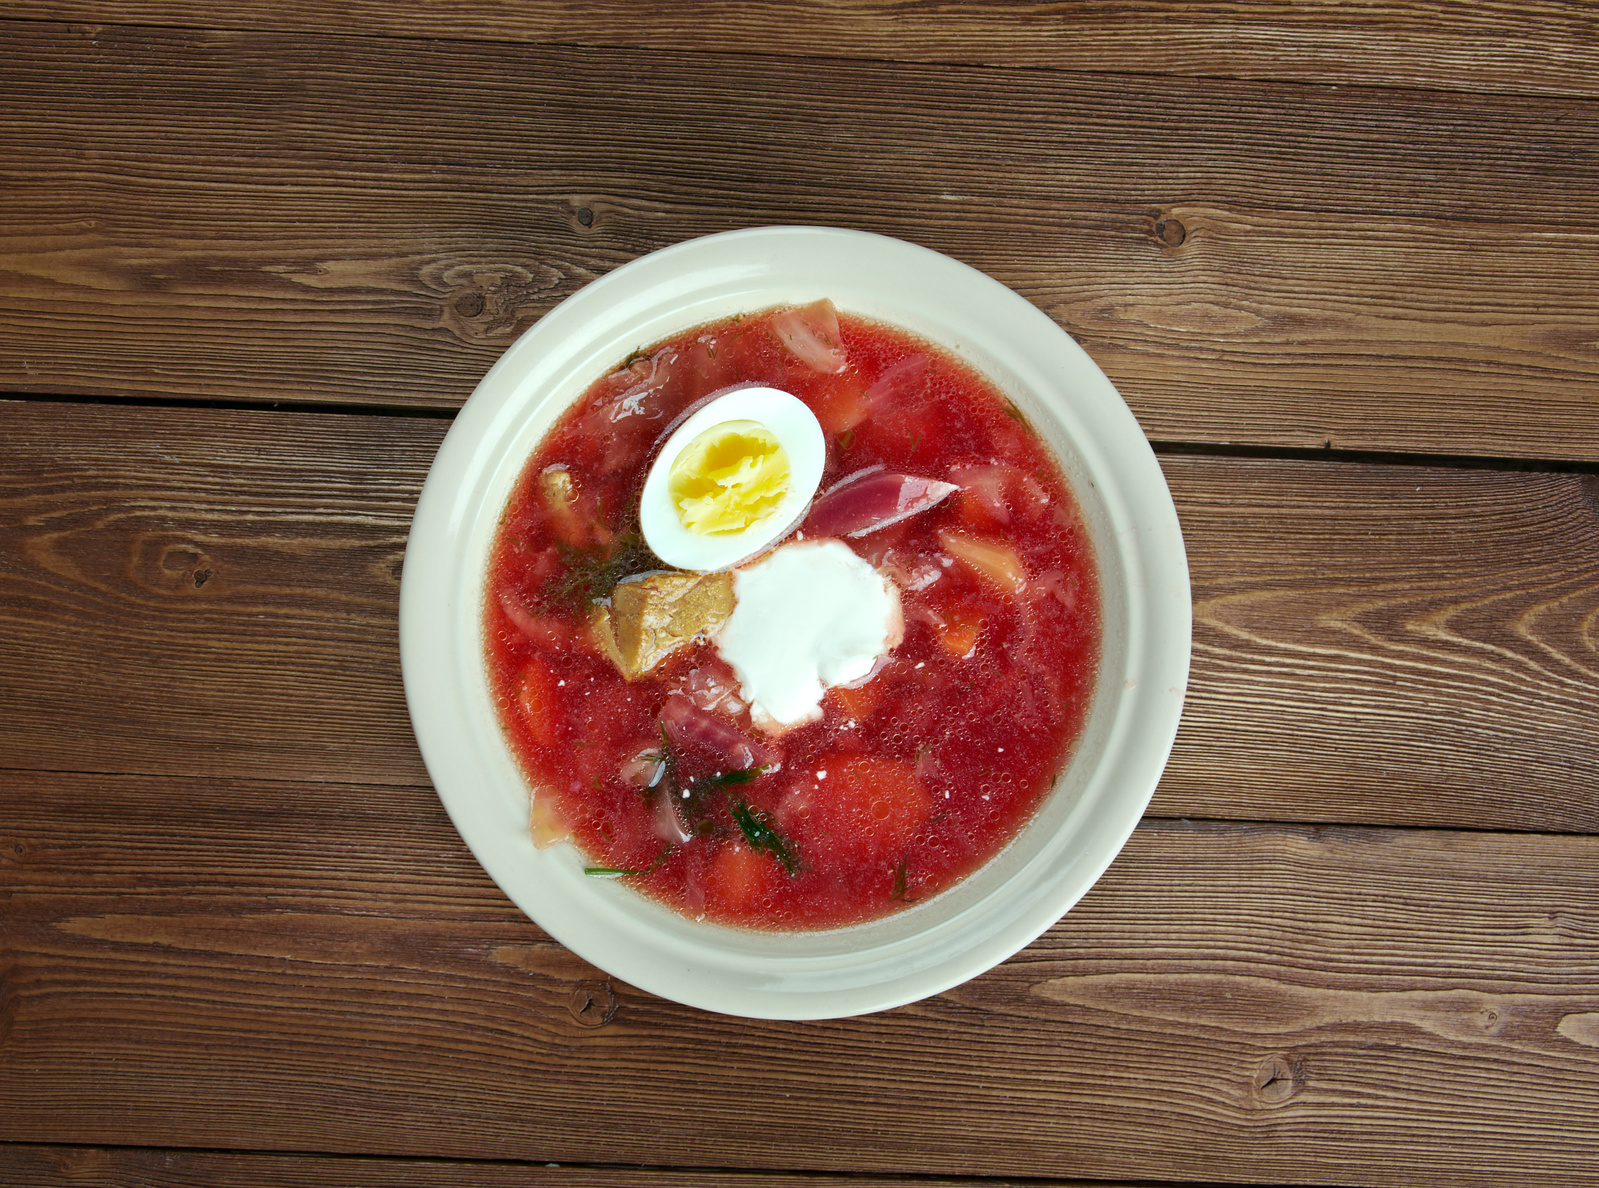 Polish barszcz -beetroot soup with egg ,popular in many Eastern and Central European cuisines.